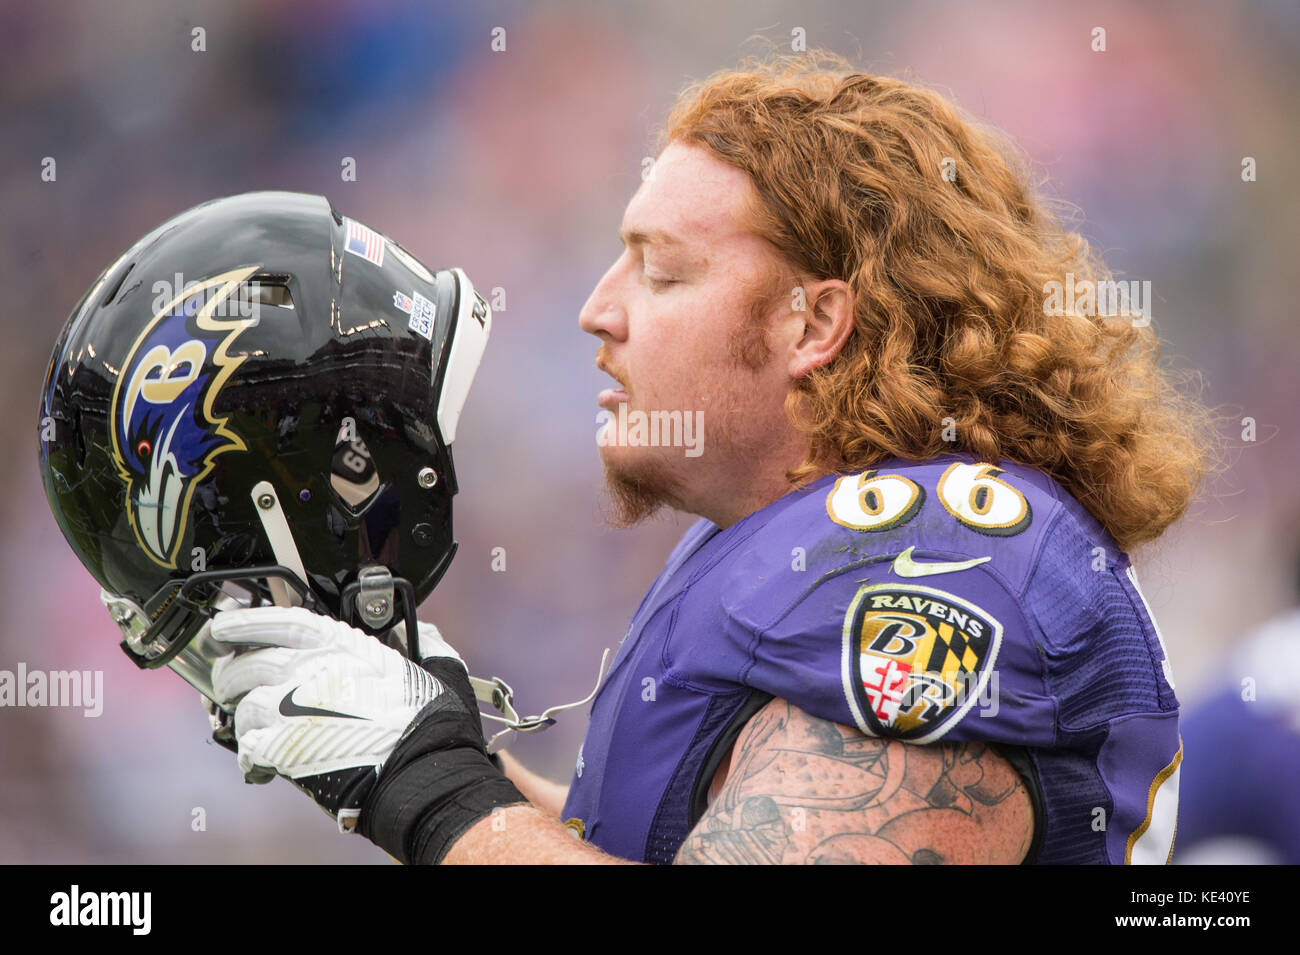 Baltimore, Maryland, USA. 15th Oct, 2017. RYAN JENSEN (66) puts his helmet back on during the game held at M & T Bank Stadium, Baltimore, Maryland. Credit: Amy Sanderson/ZUMA Wire/Alamy Live News Stock Photo